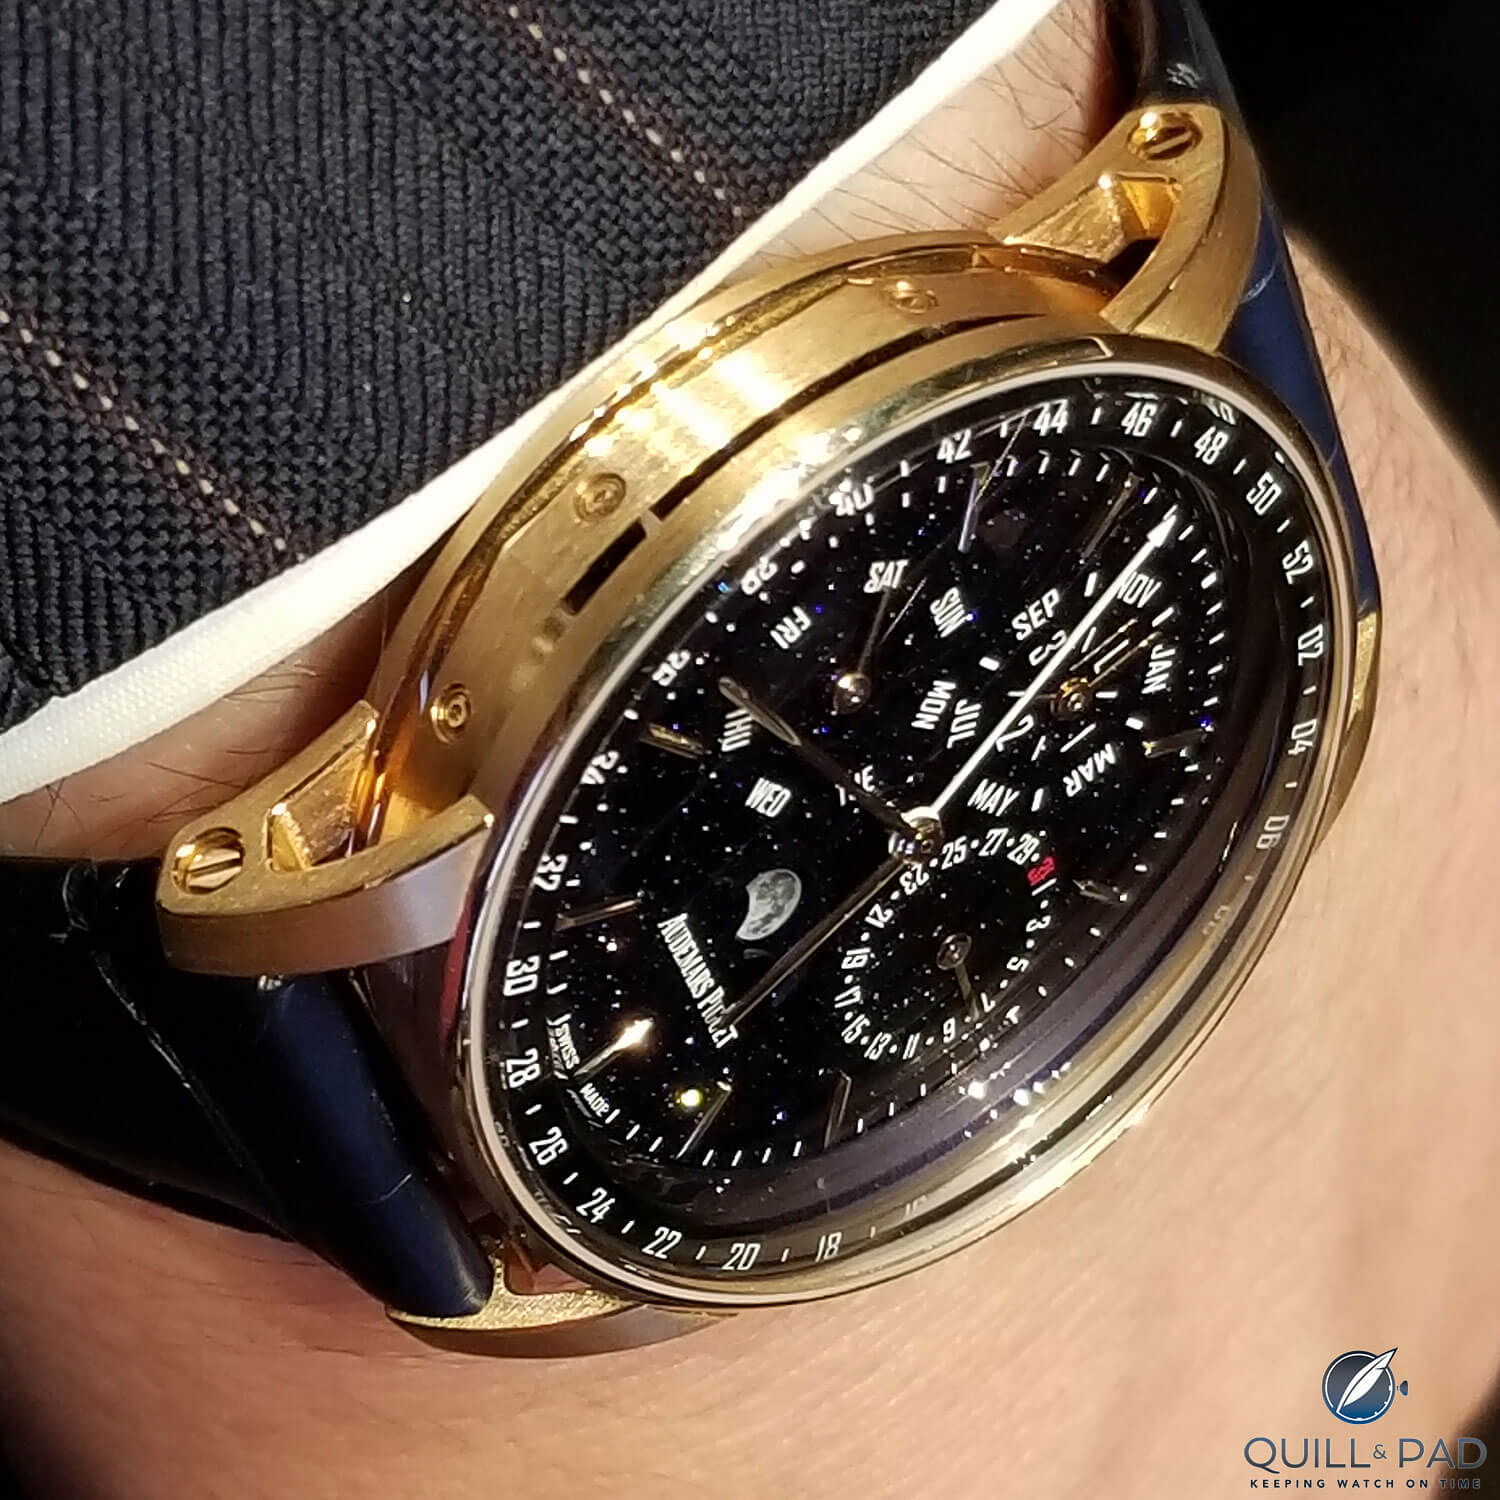 Collector Conversations: Shark Tank's 'Mr. Wonderful,' Kevin O'Leary,  Reveals Watch Collecting Philosophy To GaryG - Quill & Pad